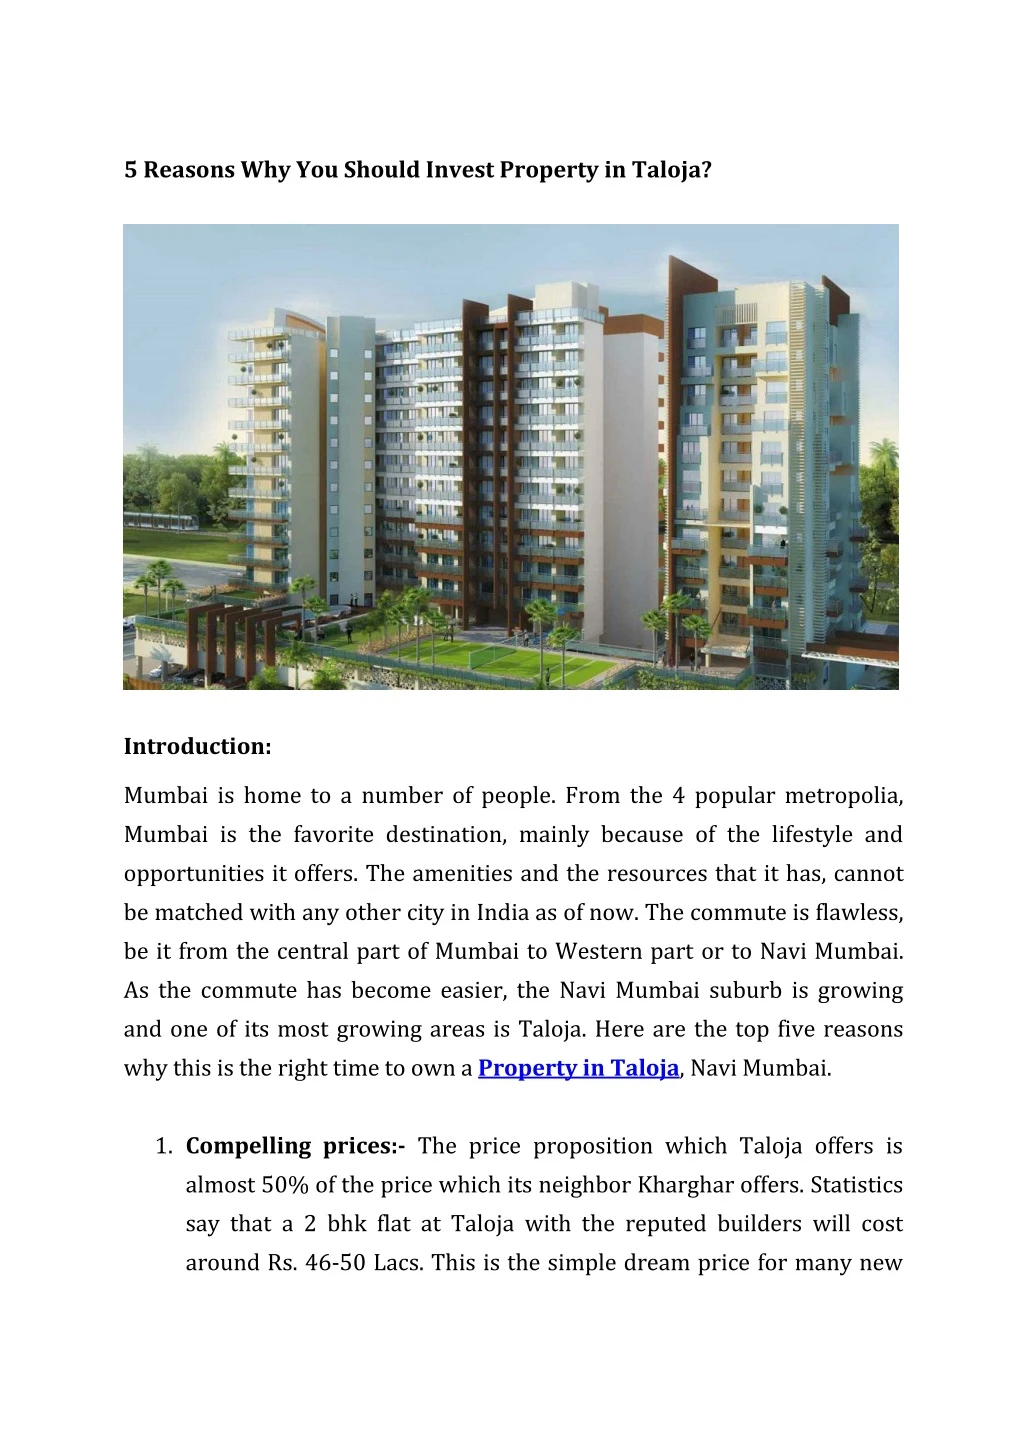 5 reasons why you should invest property in taloja